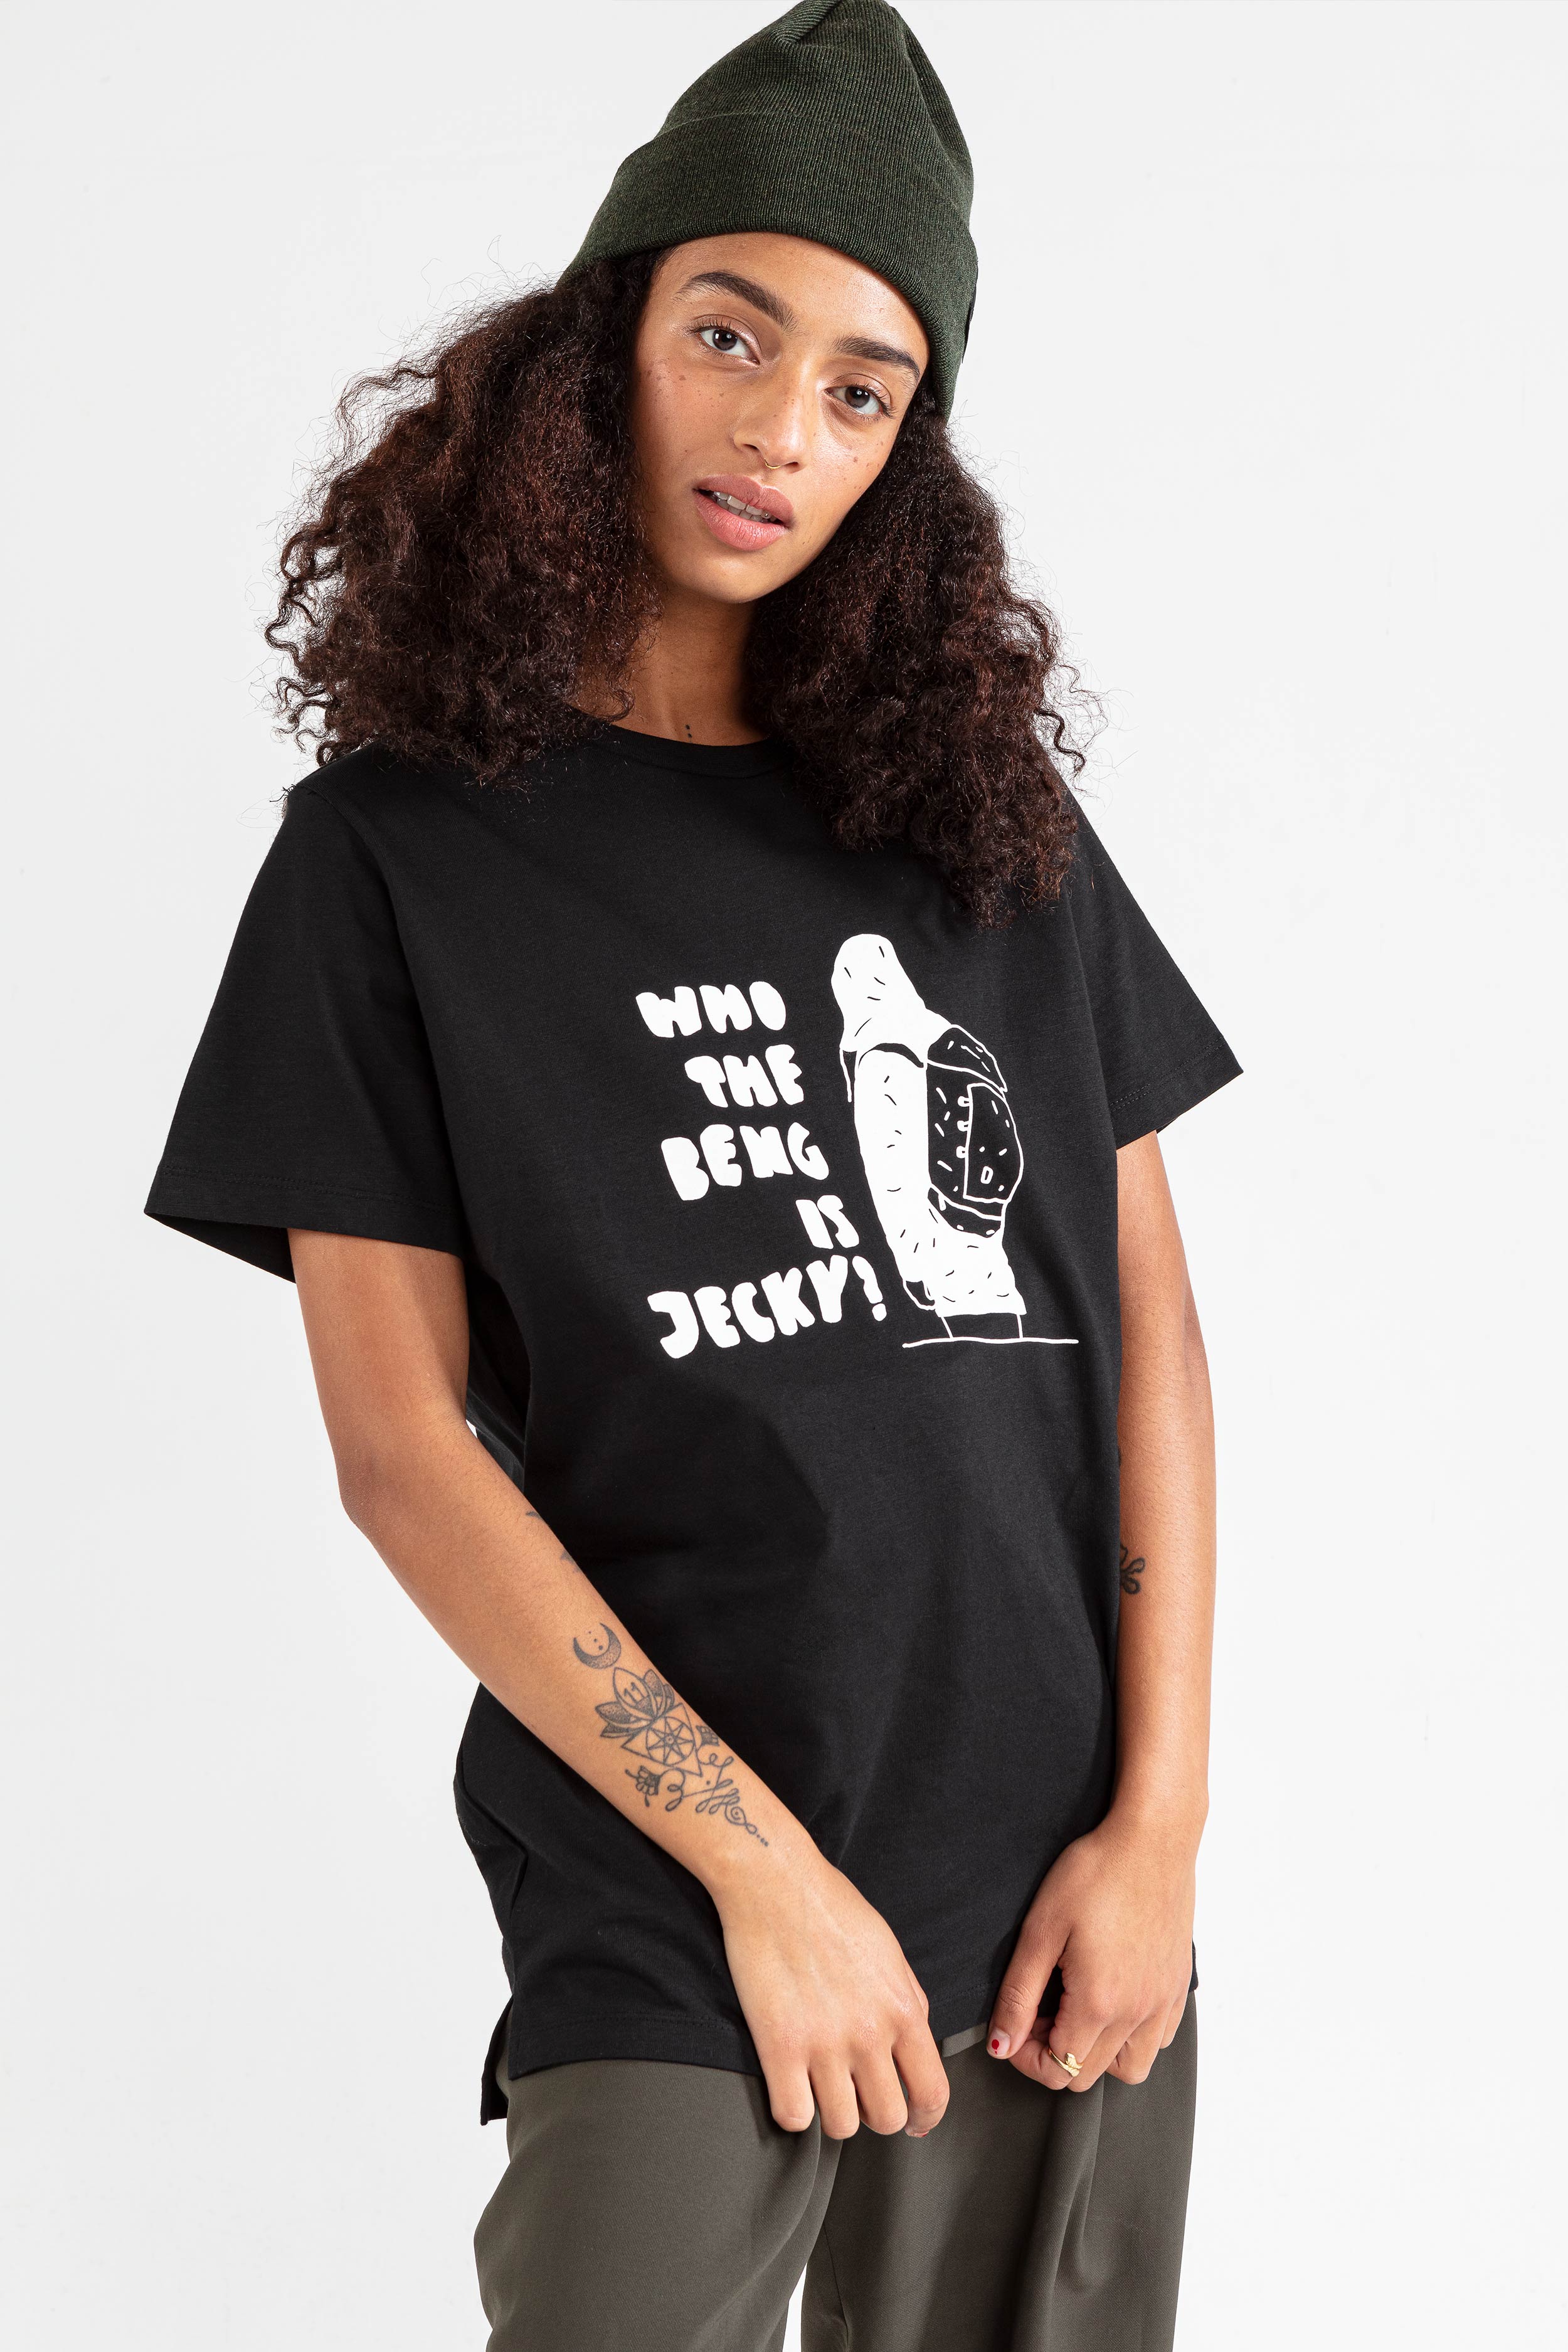 JECKYBENG-WHO-THE-BENG-IS-JECKY-T-Shirt-01 black